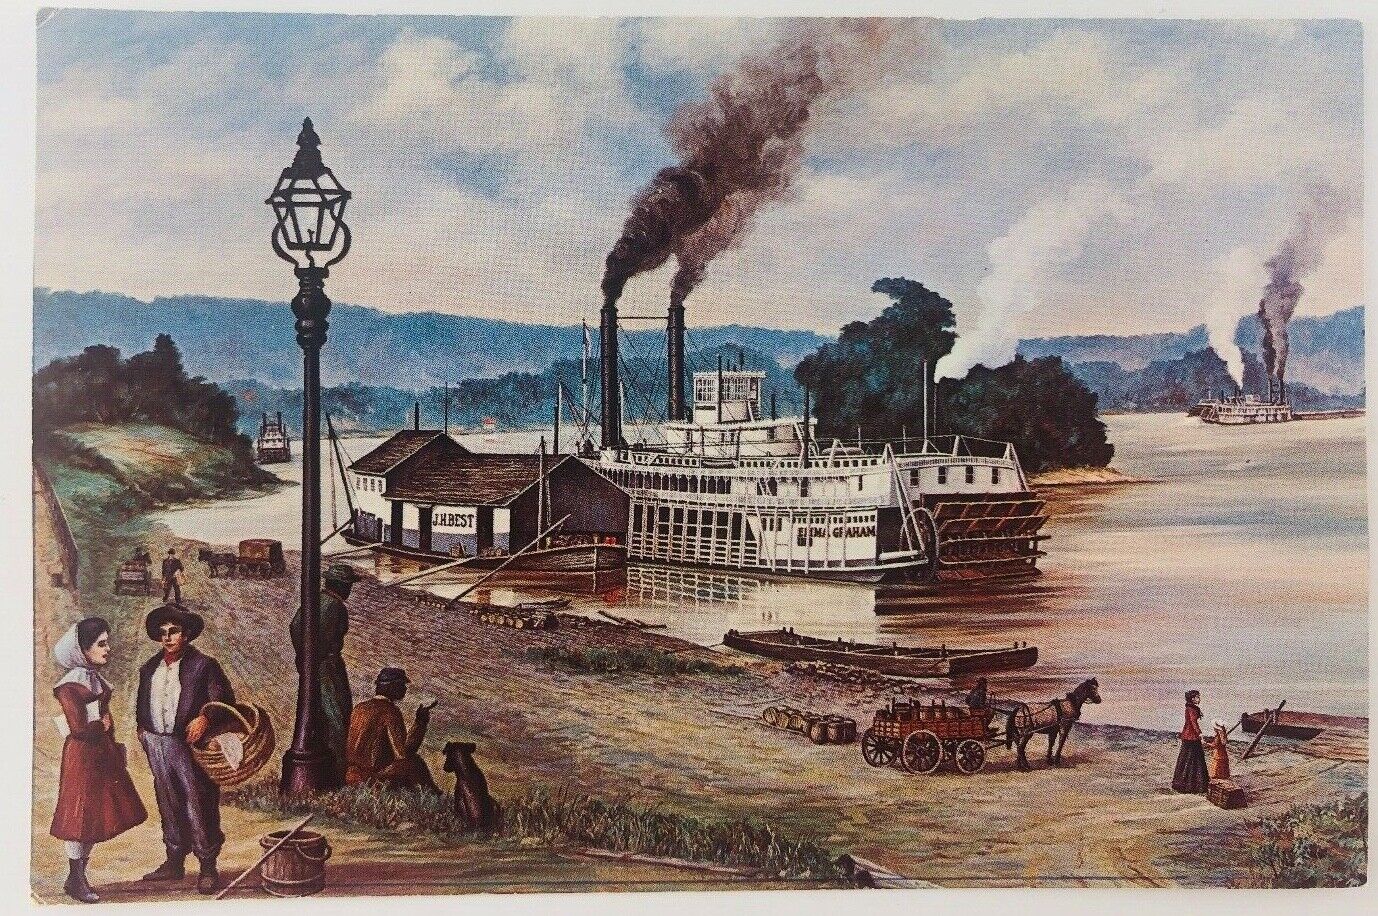 Vintage Marietta Wharf in 1882 by Artist William E. Reed with EMMA GRAHAM Ship